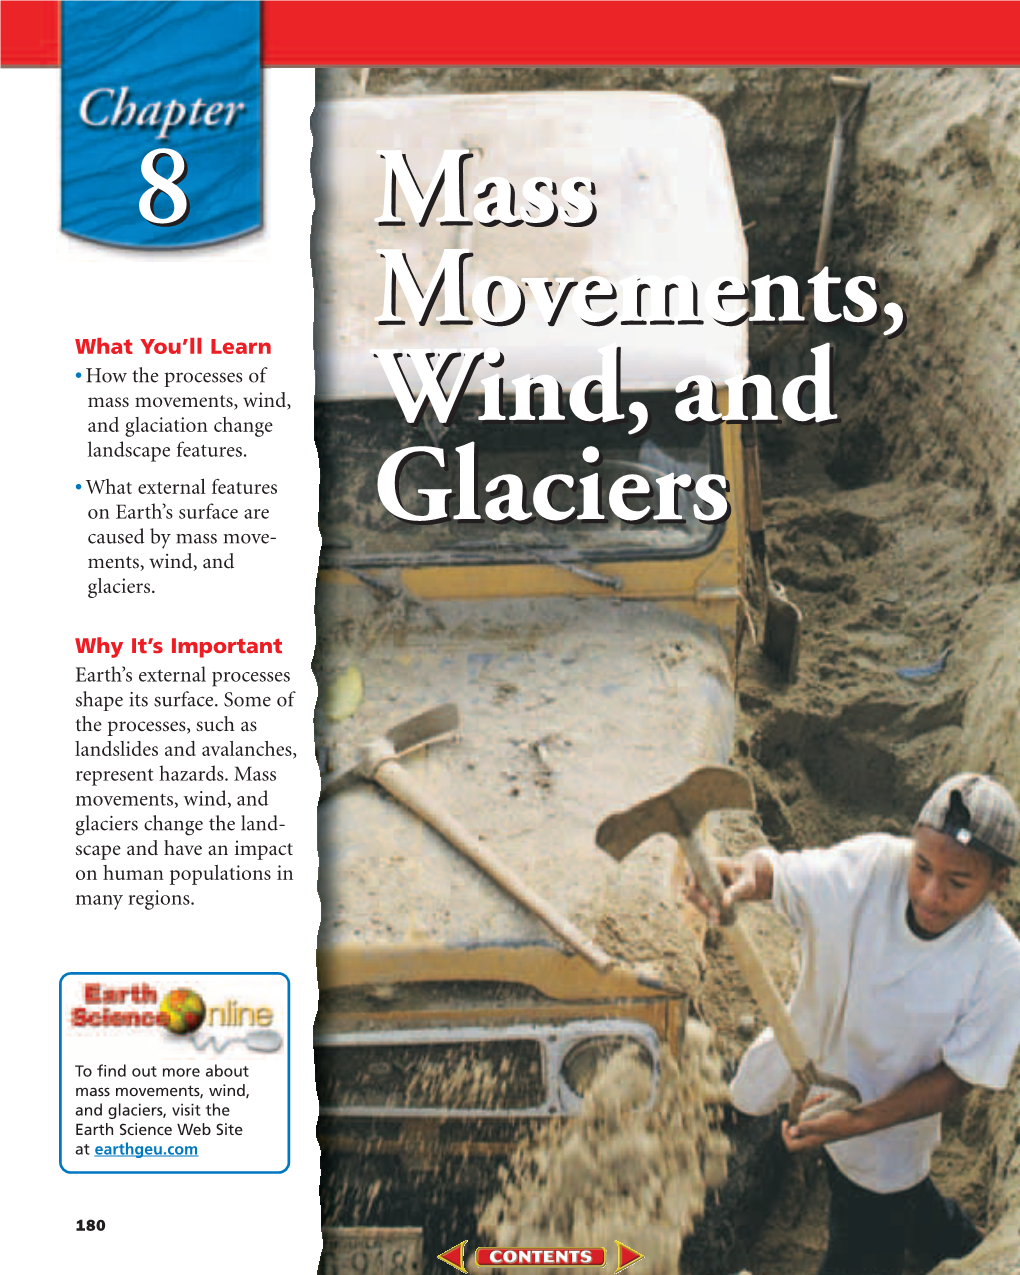 Chapter 8: Mass Movements, Wind, and Glaciers